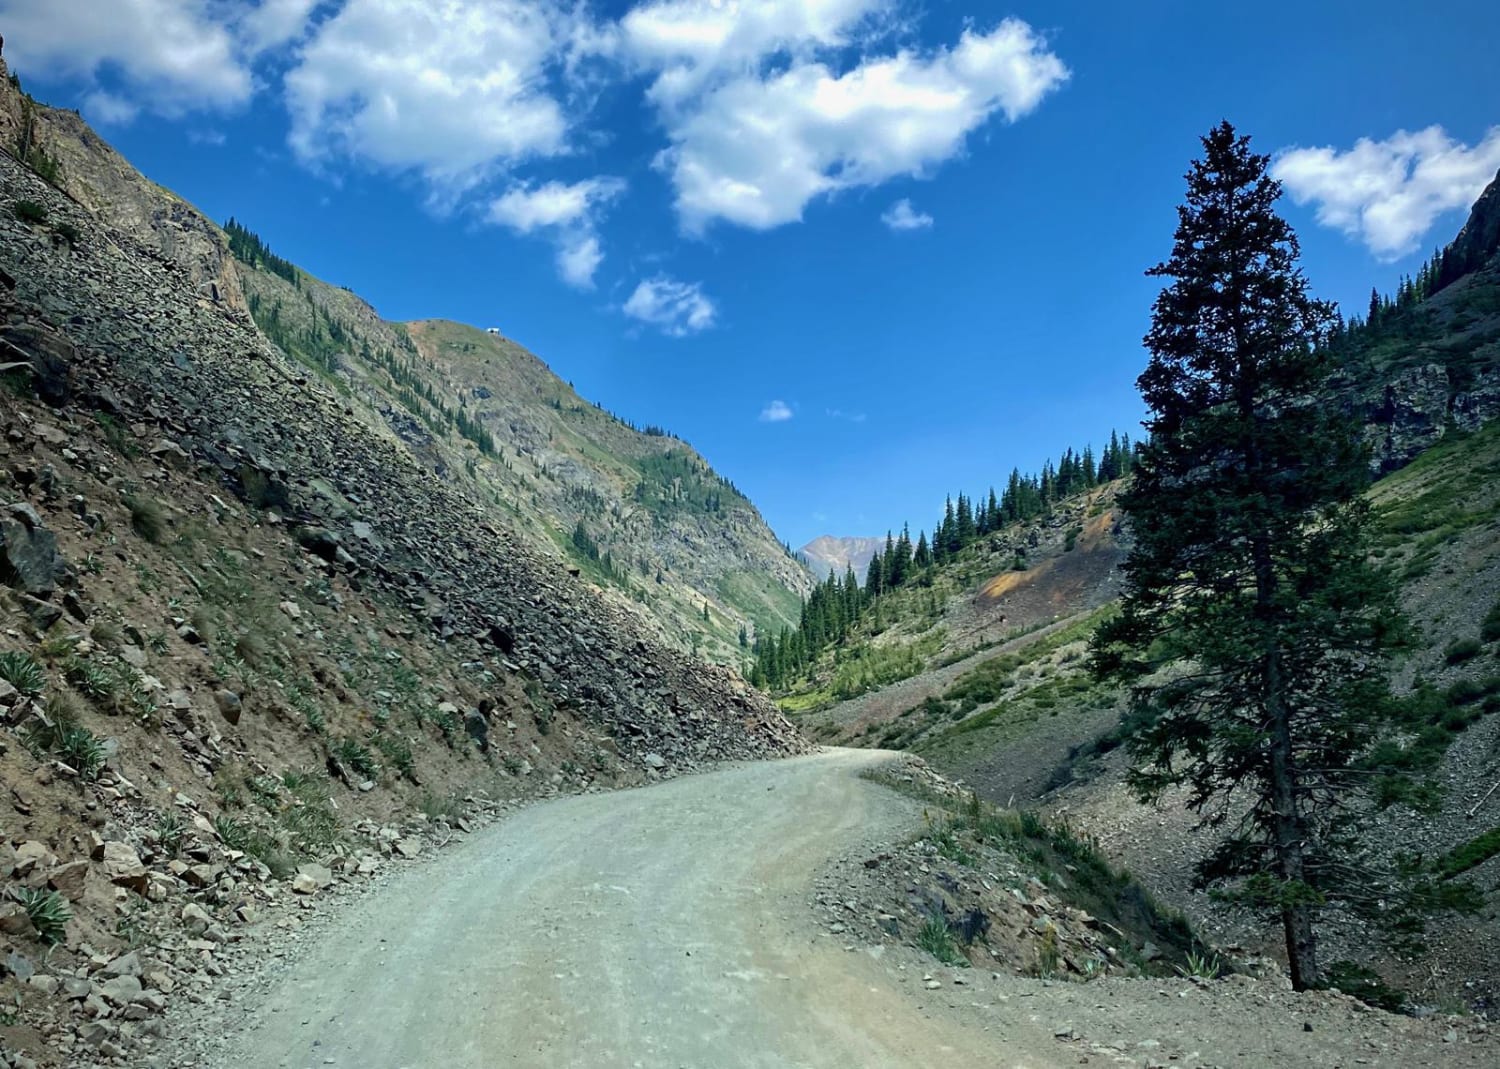 County Road 2 Connector - Silverton to Animas Forks and Engineer Pass